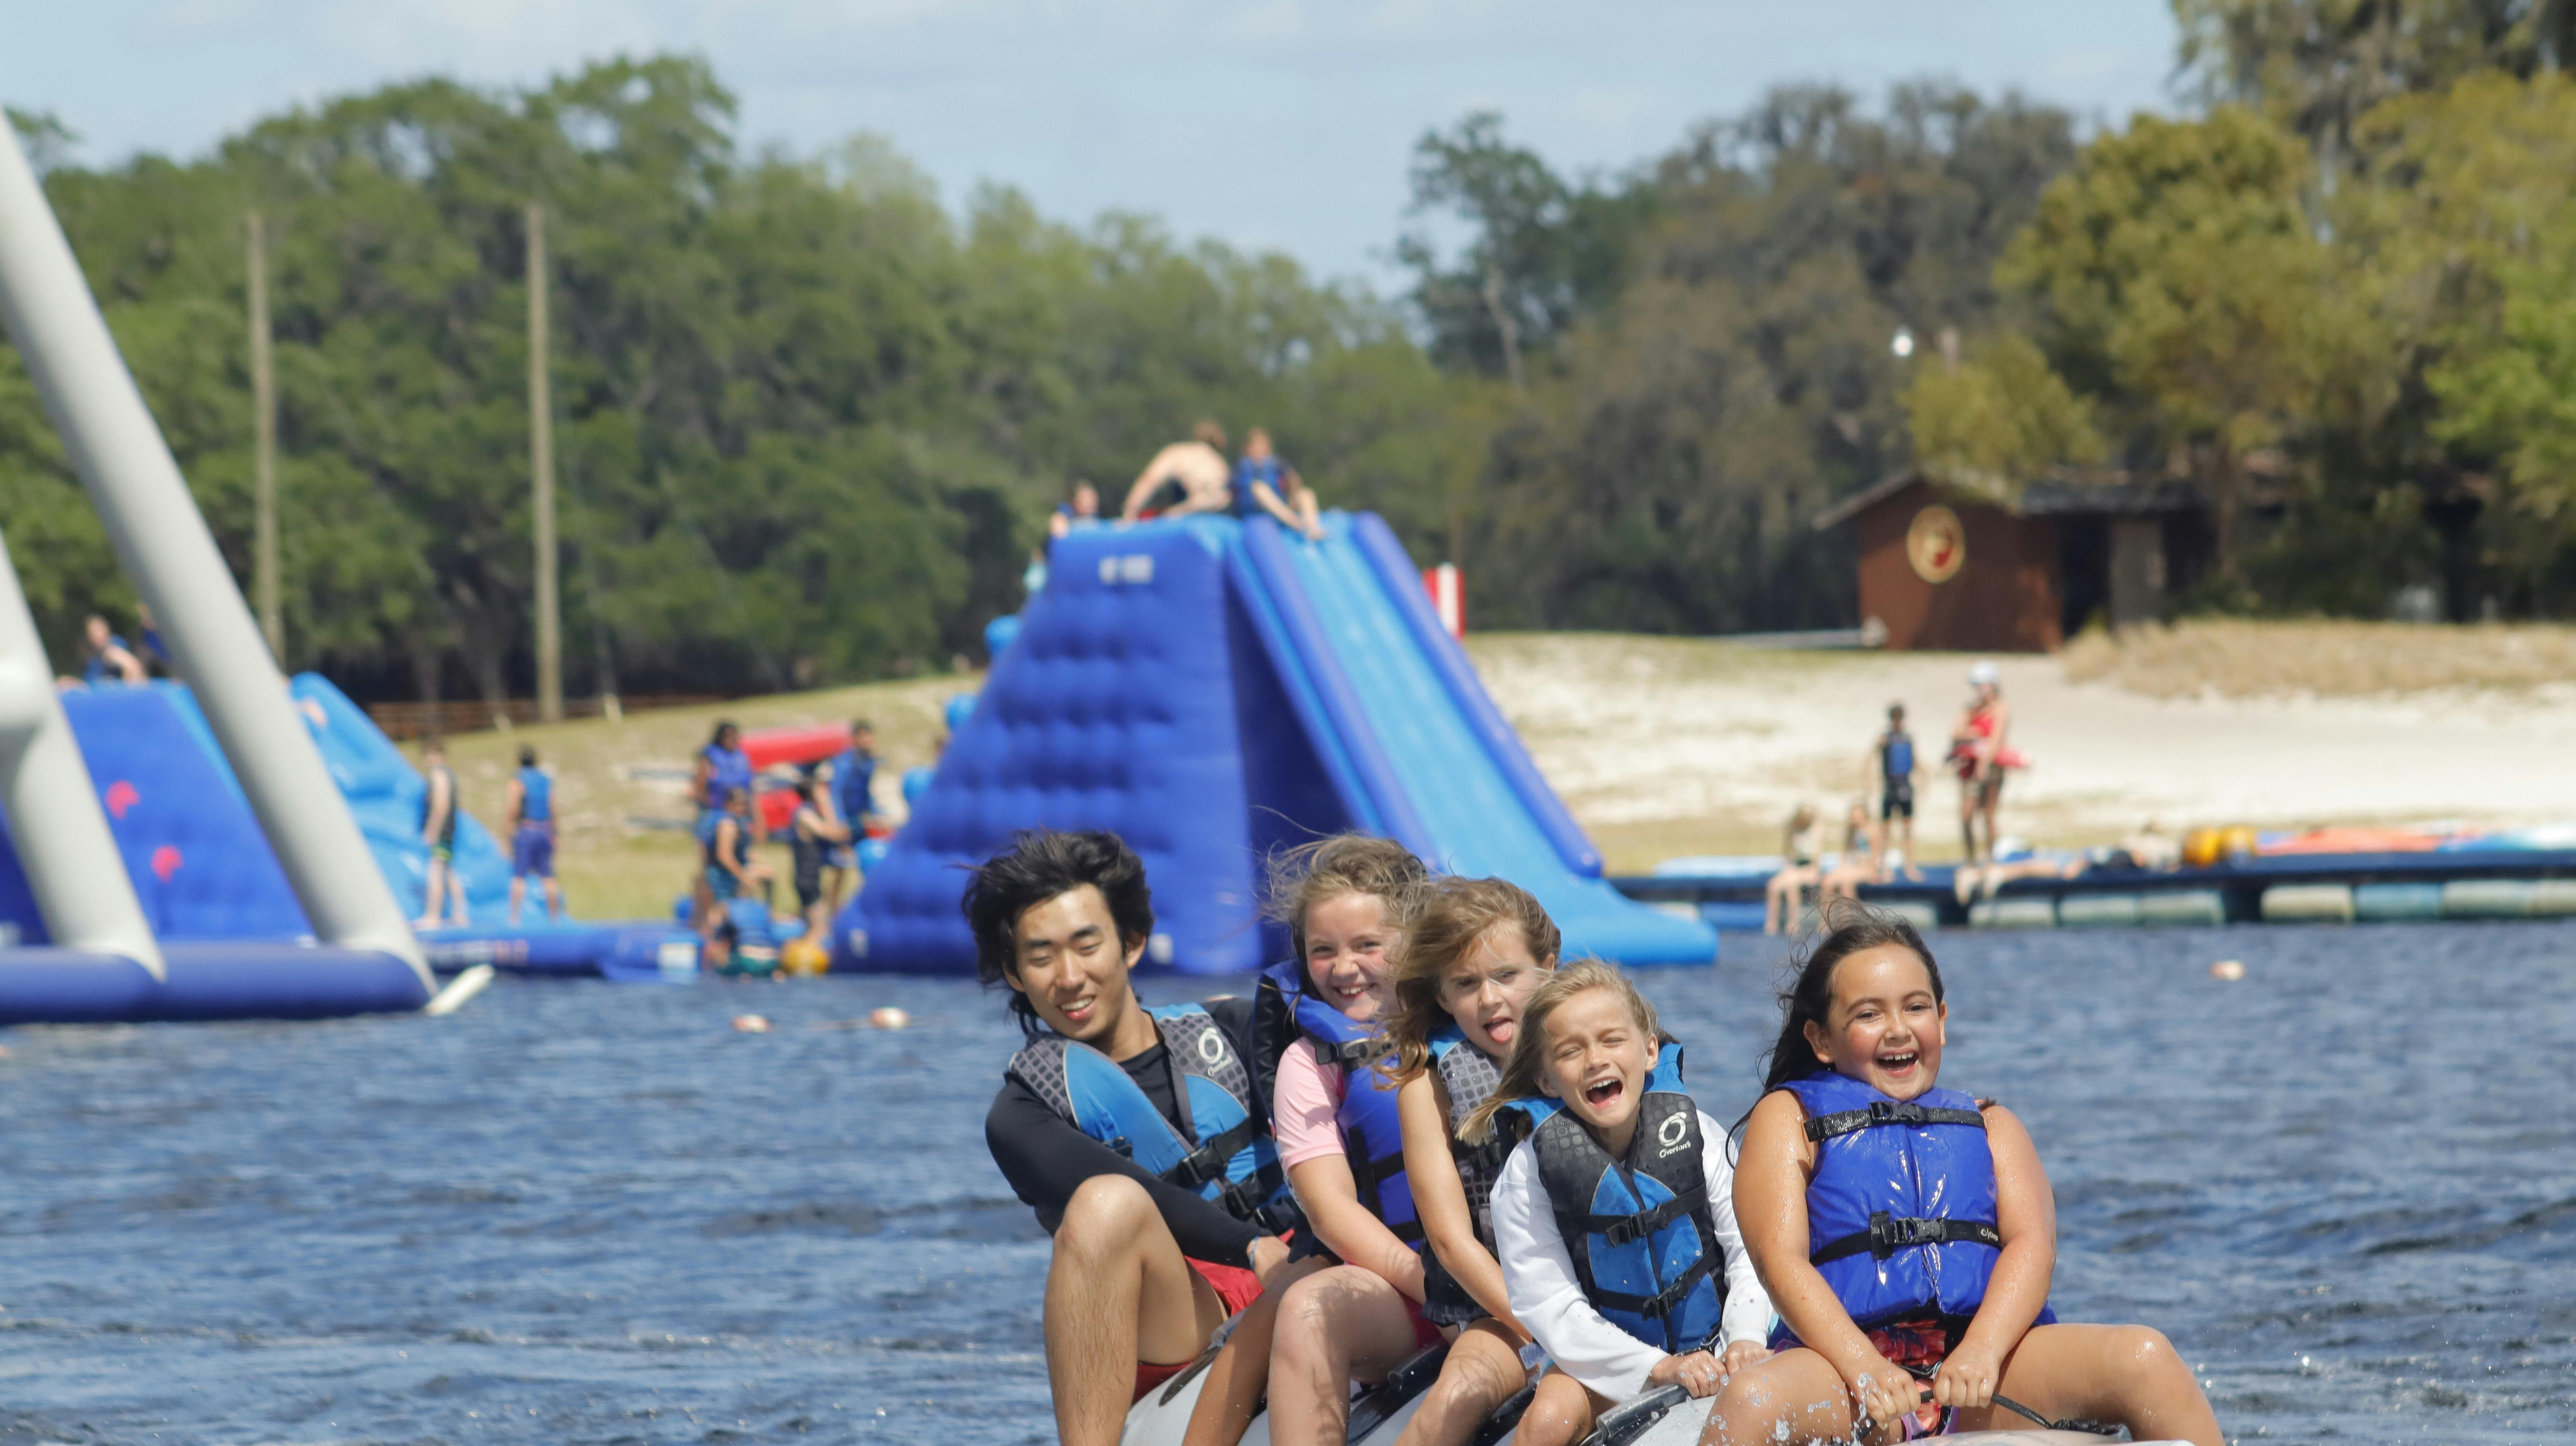 Top 5 Reasons to Send Your Kids to a Florida Sleepaway Camp for Spring Break